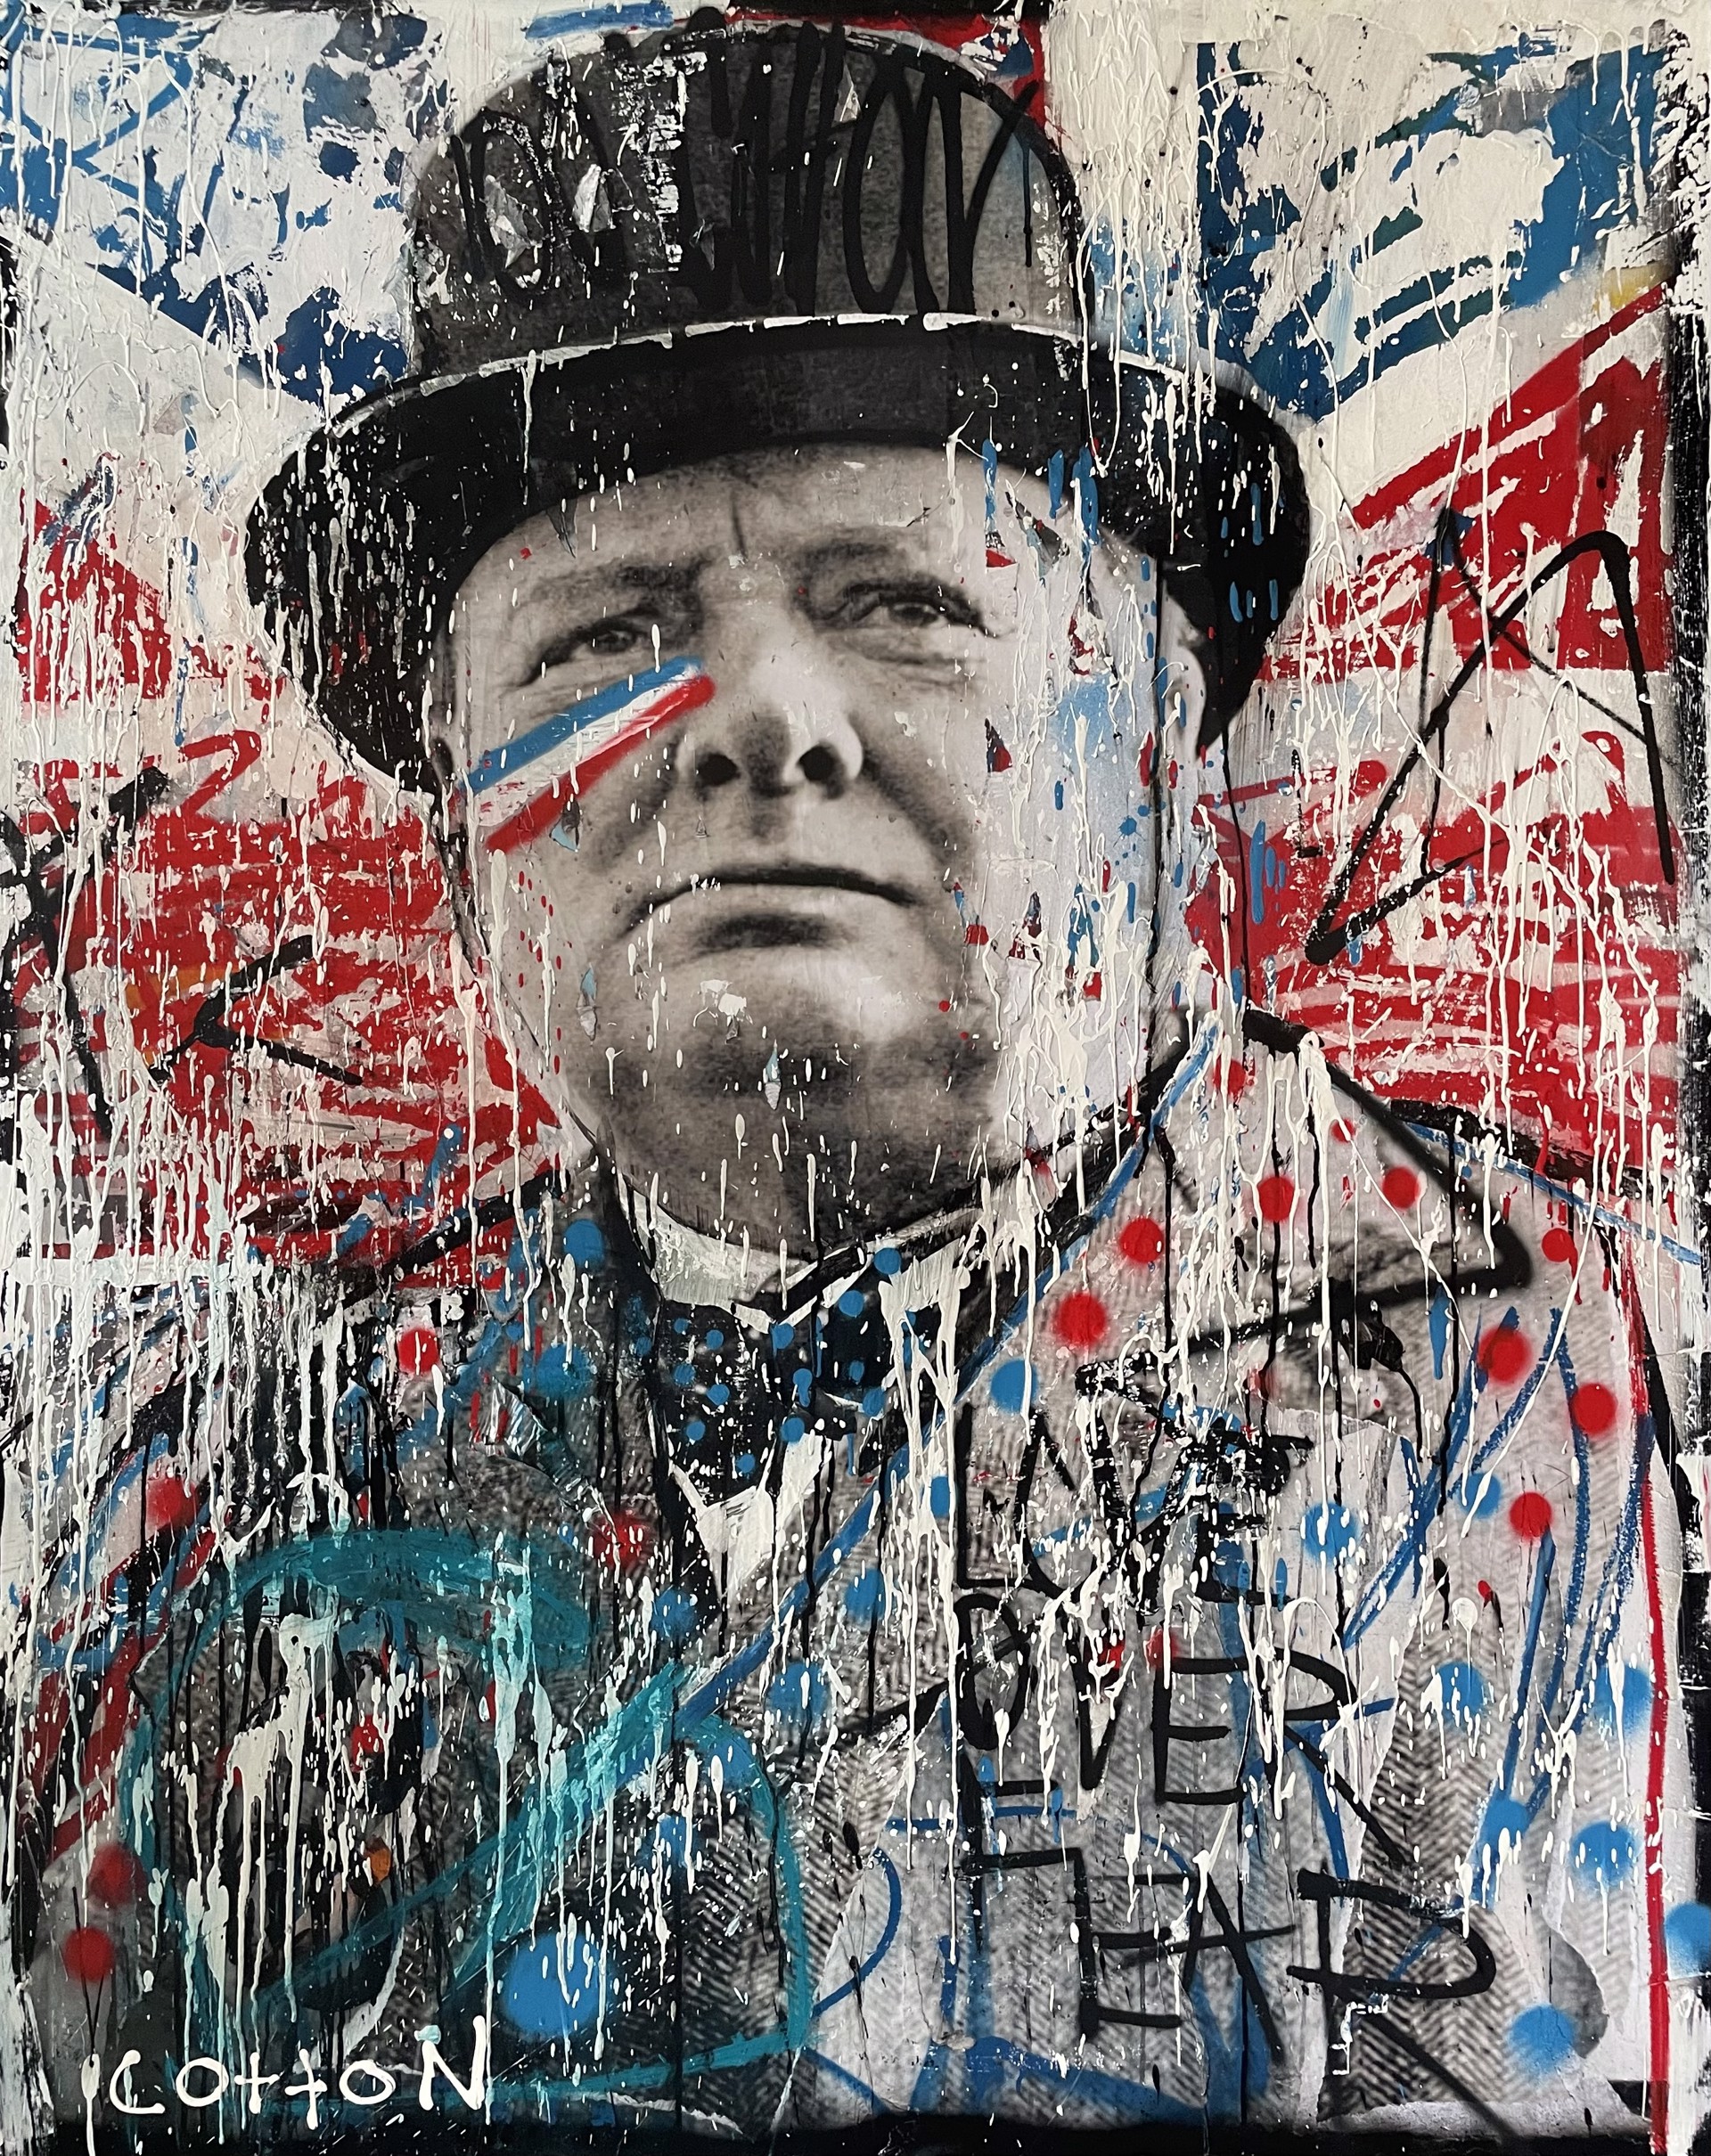 Winston Churchill (If You're Going Through Hell, Keep Going) by Andrew Cotton